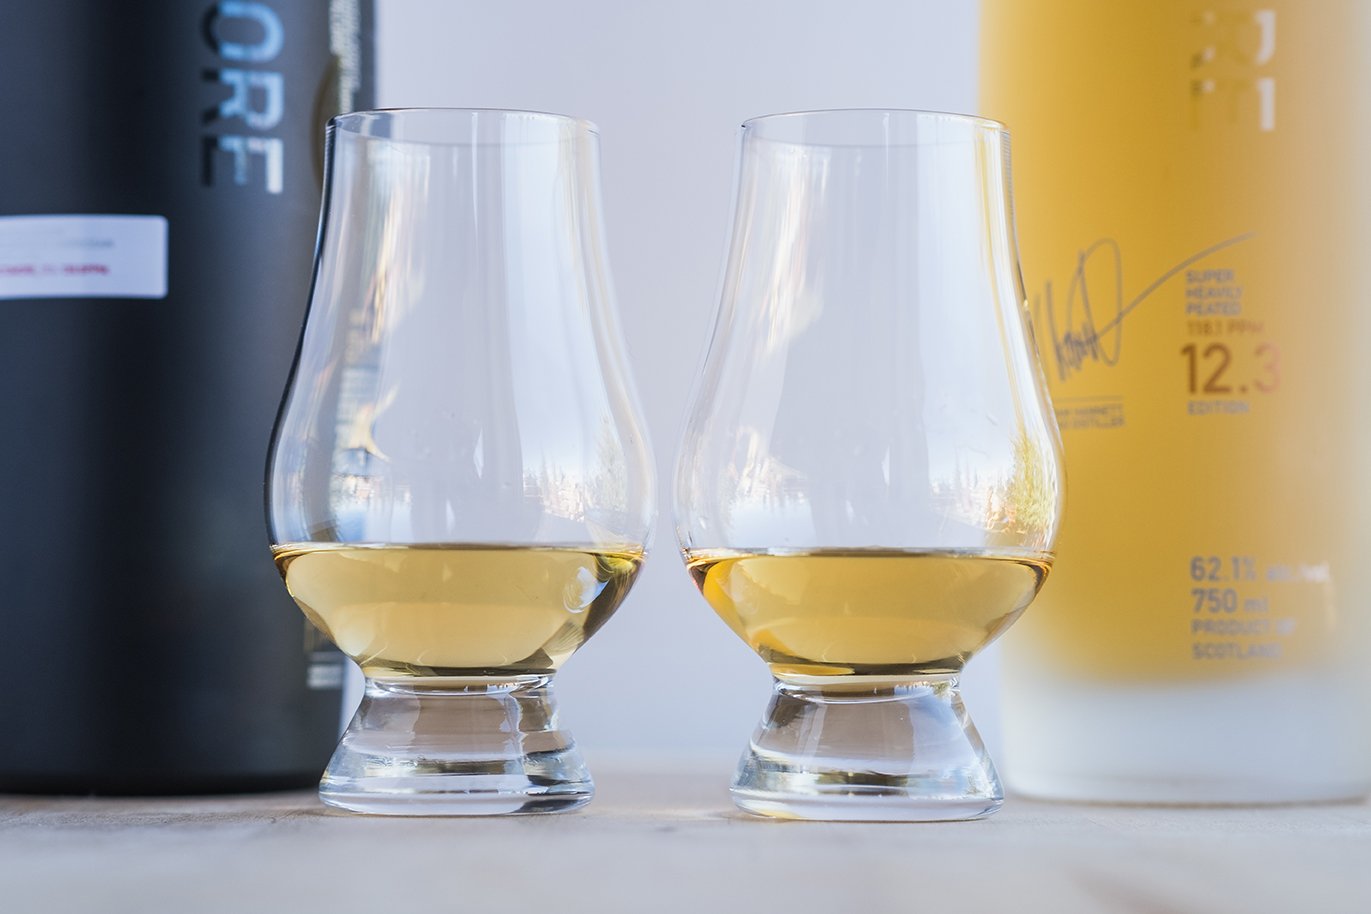 Octomore_11.1 and 12.3_03.jpg